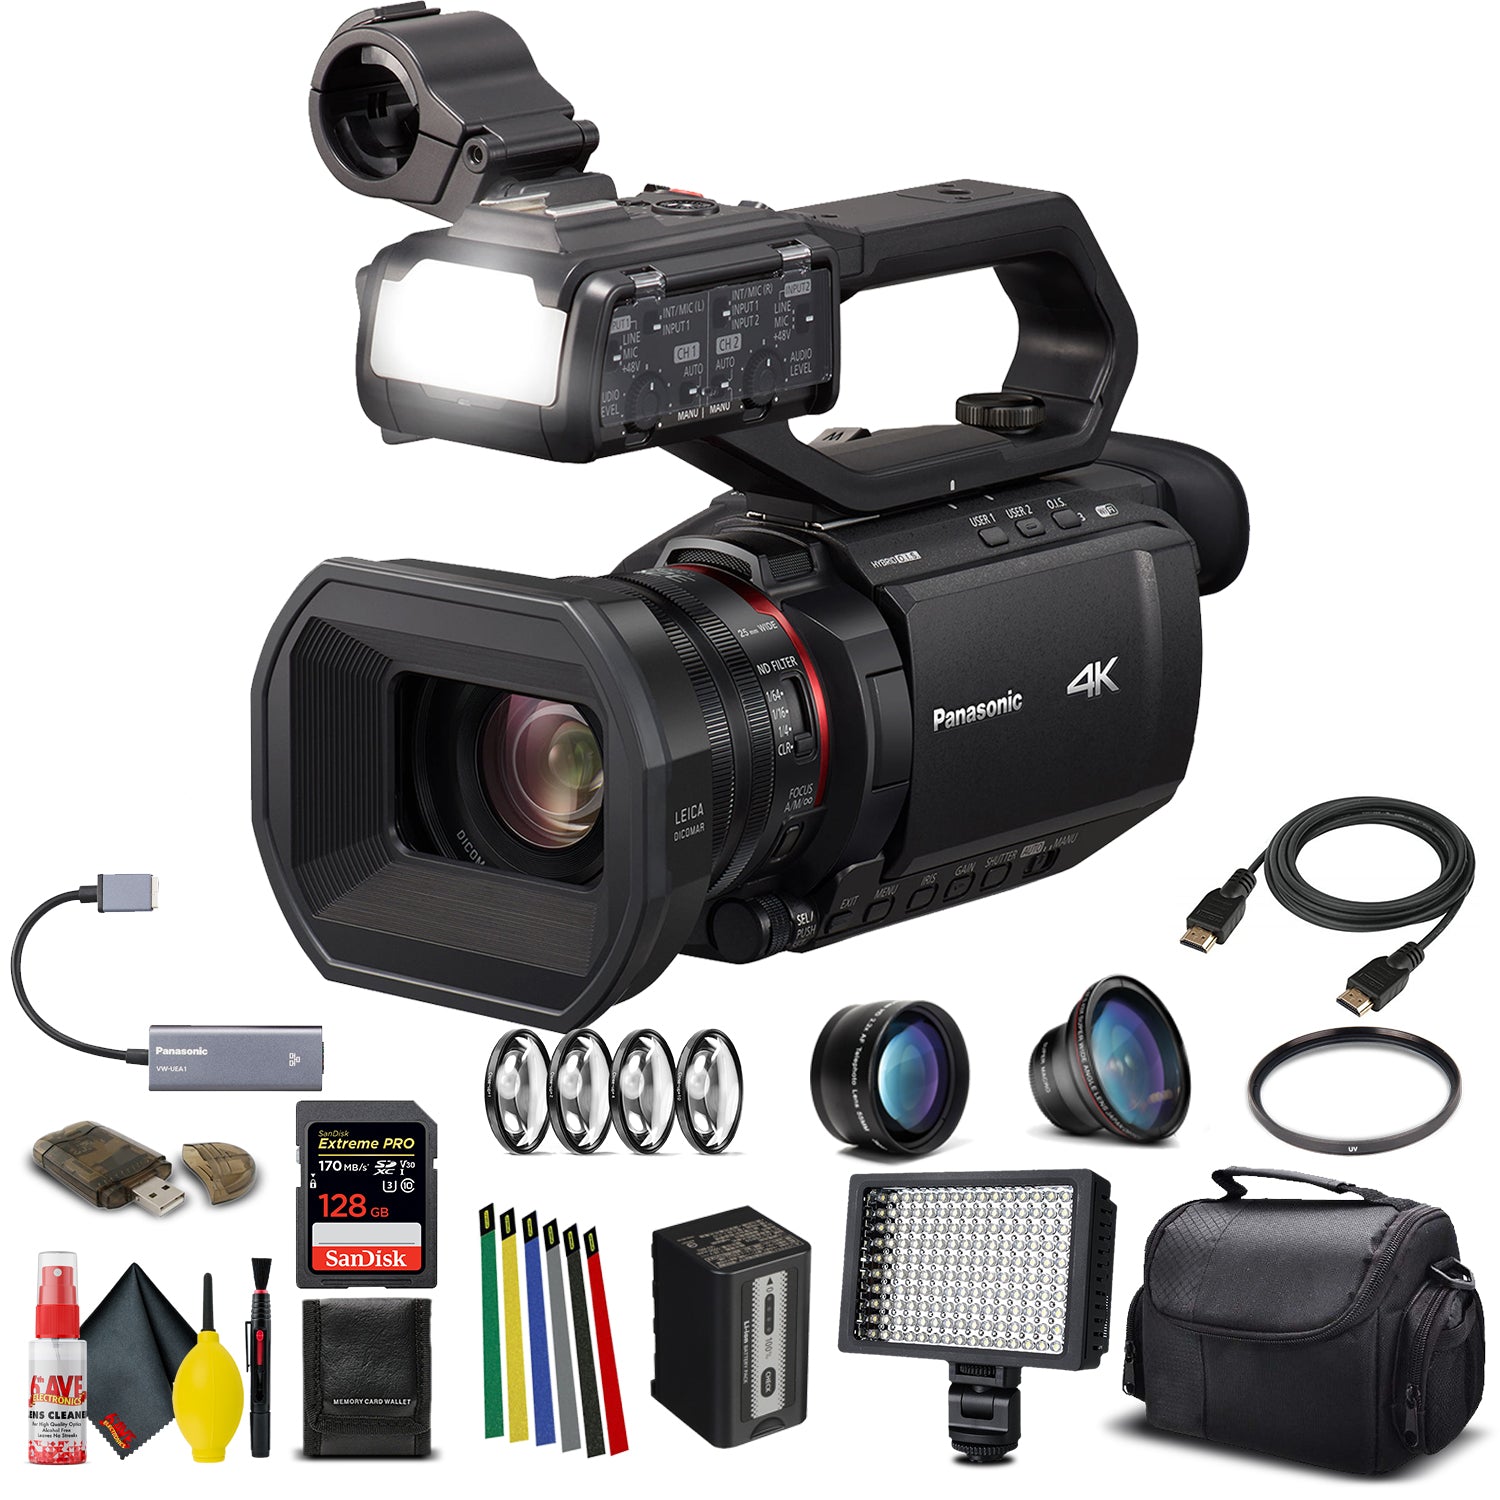 Panasonic AG-CX10 4K Camcorder + Padded Case, Sandisk Extreme Pro 128 GB Memory Card, Lens Attachments, Wire Straps, LED Light, And More?